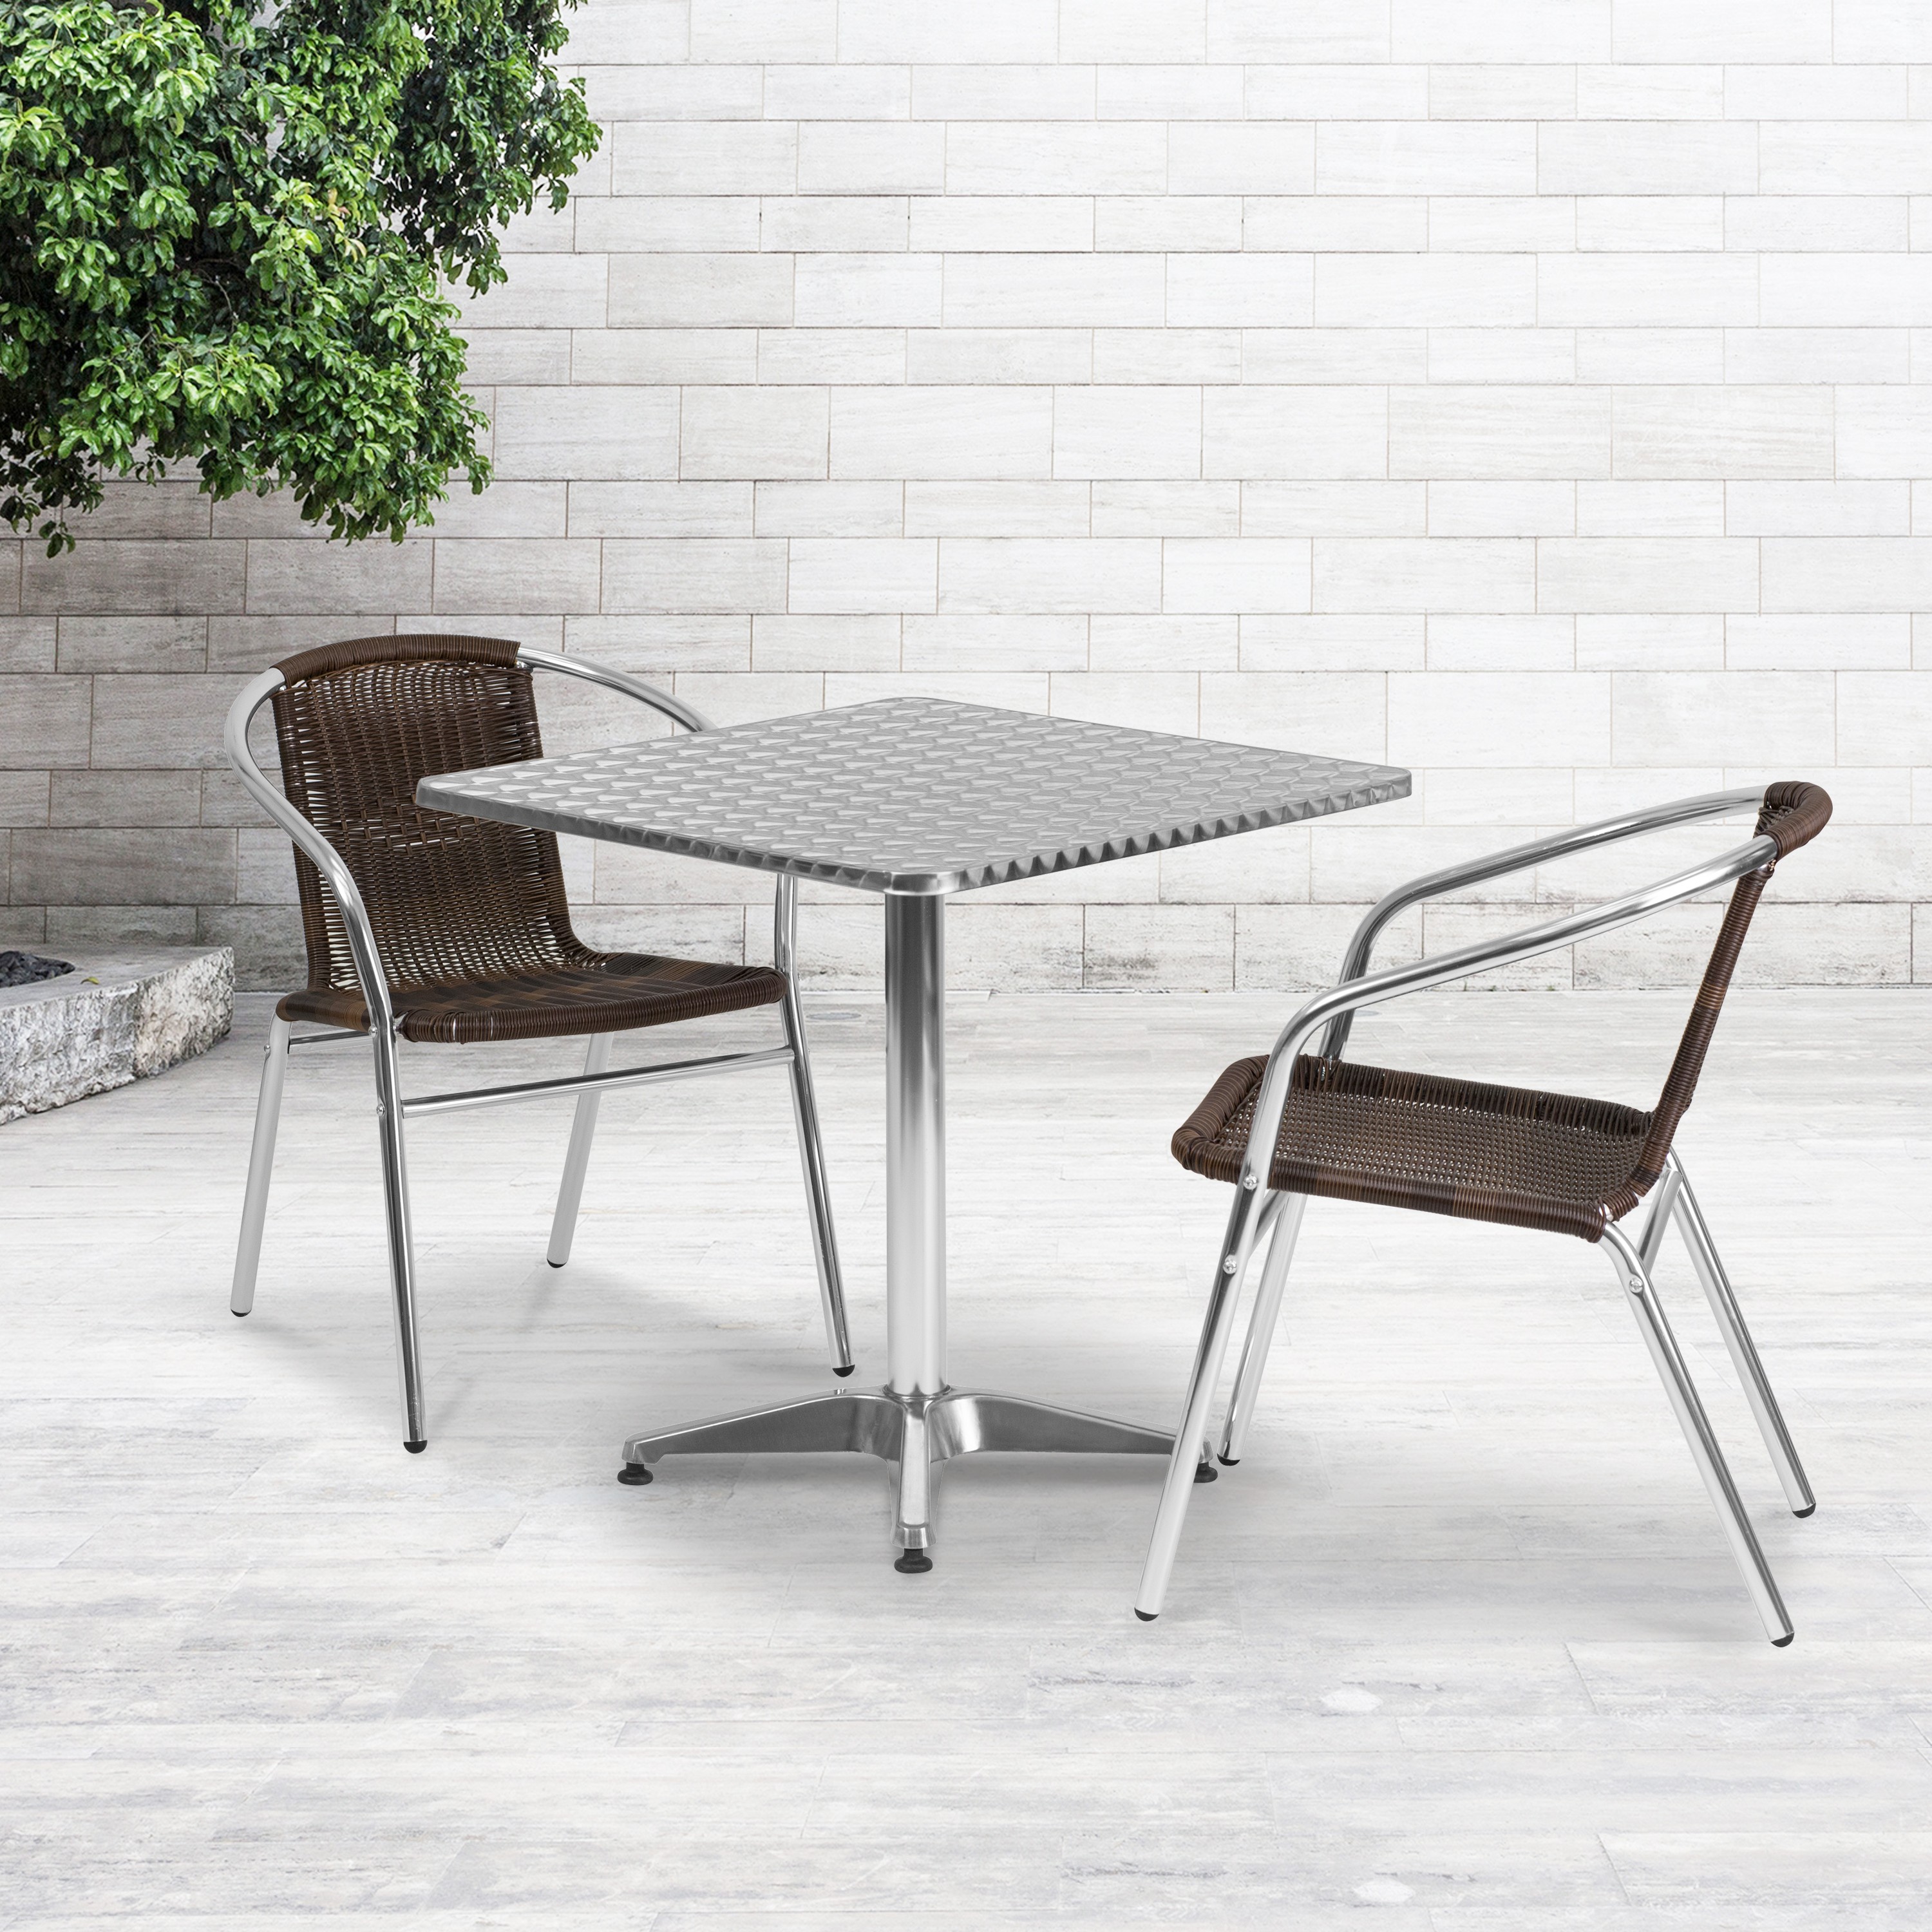 Flash Furniture Lila 27.5'' Square Aluminum Indoor-Outdoor Table Set with 2 Dark Brown Rattan Chairs - image 2 of 5